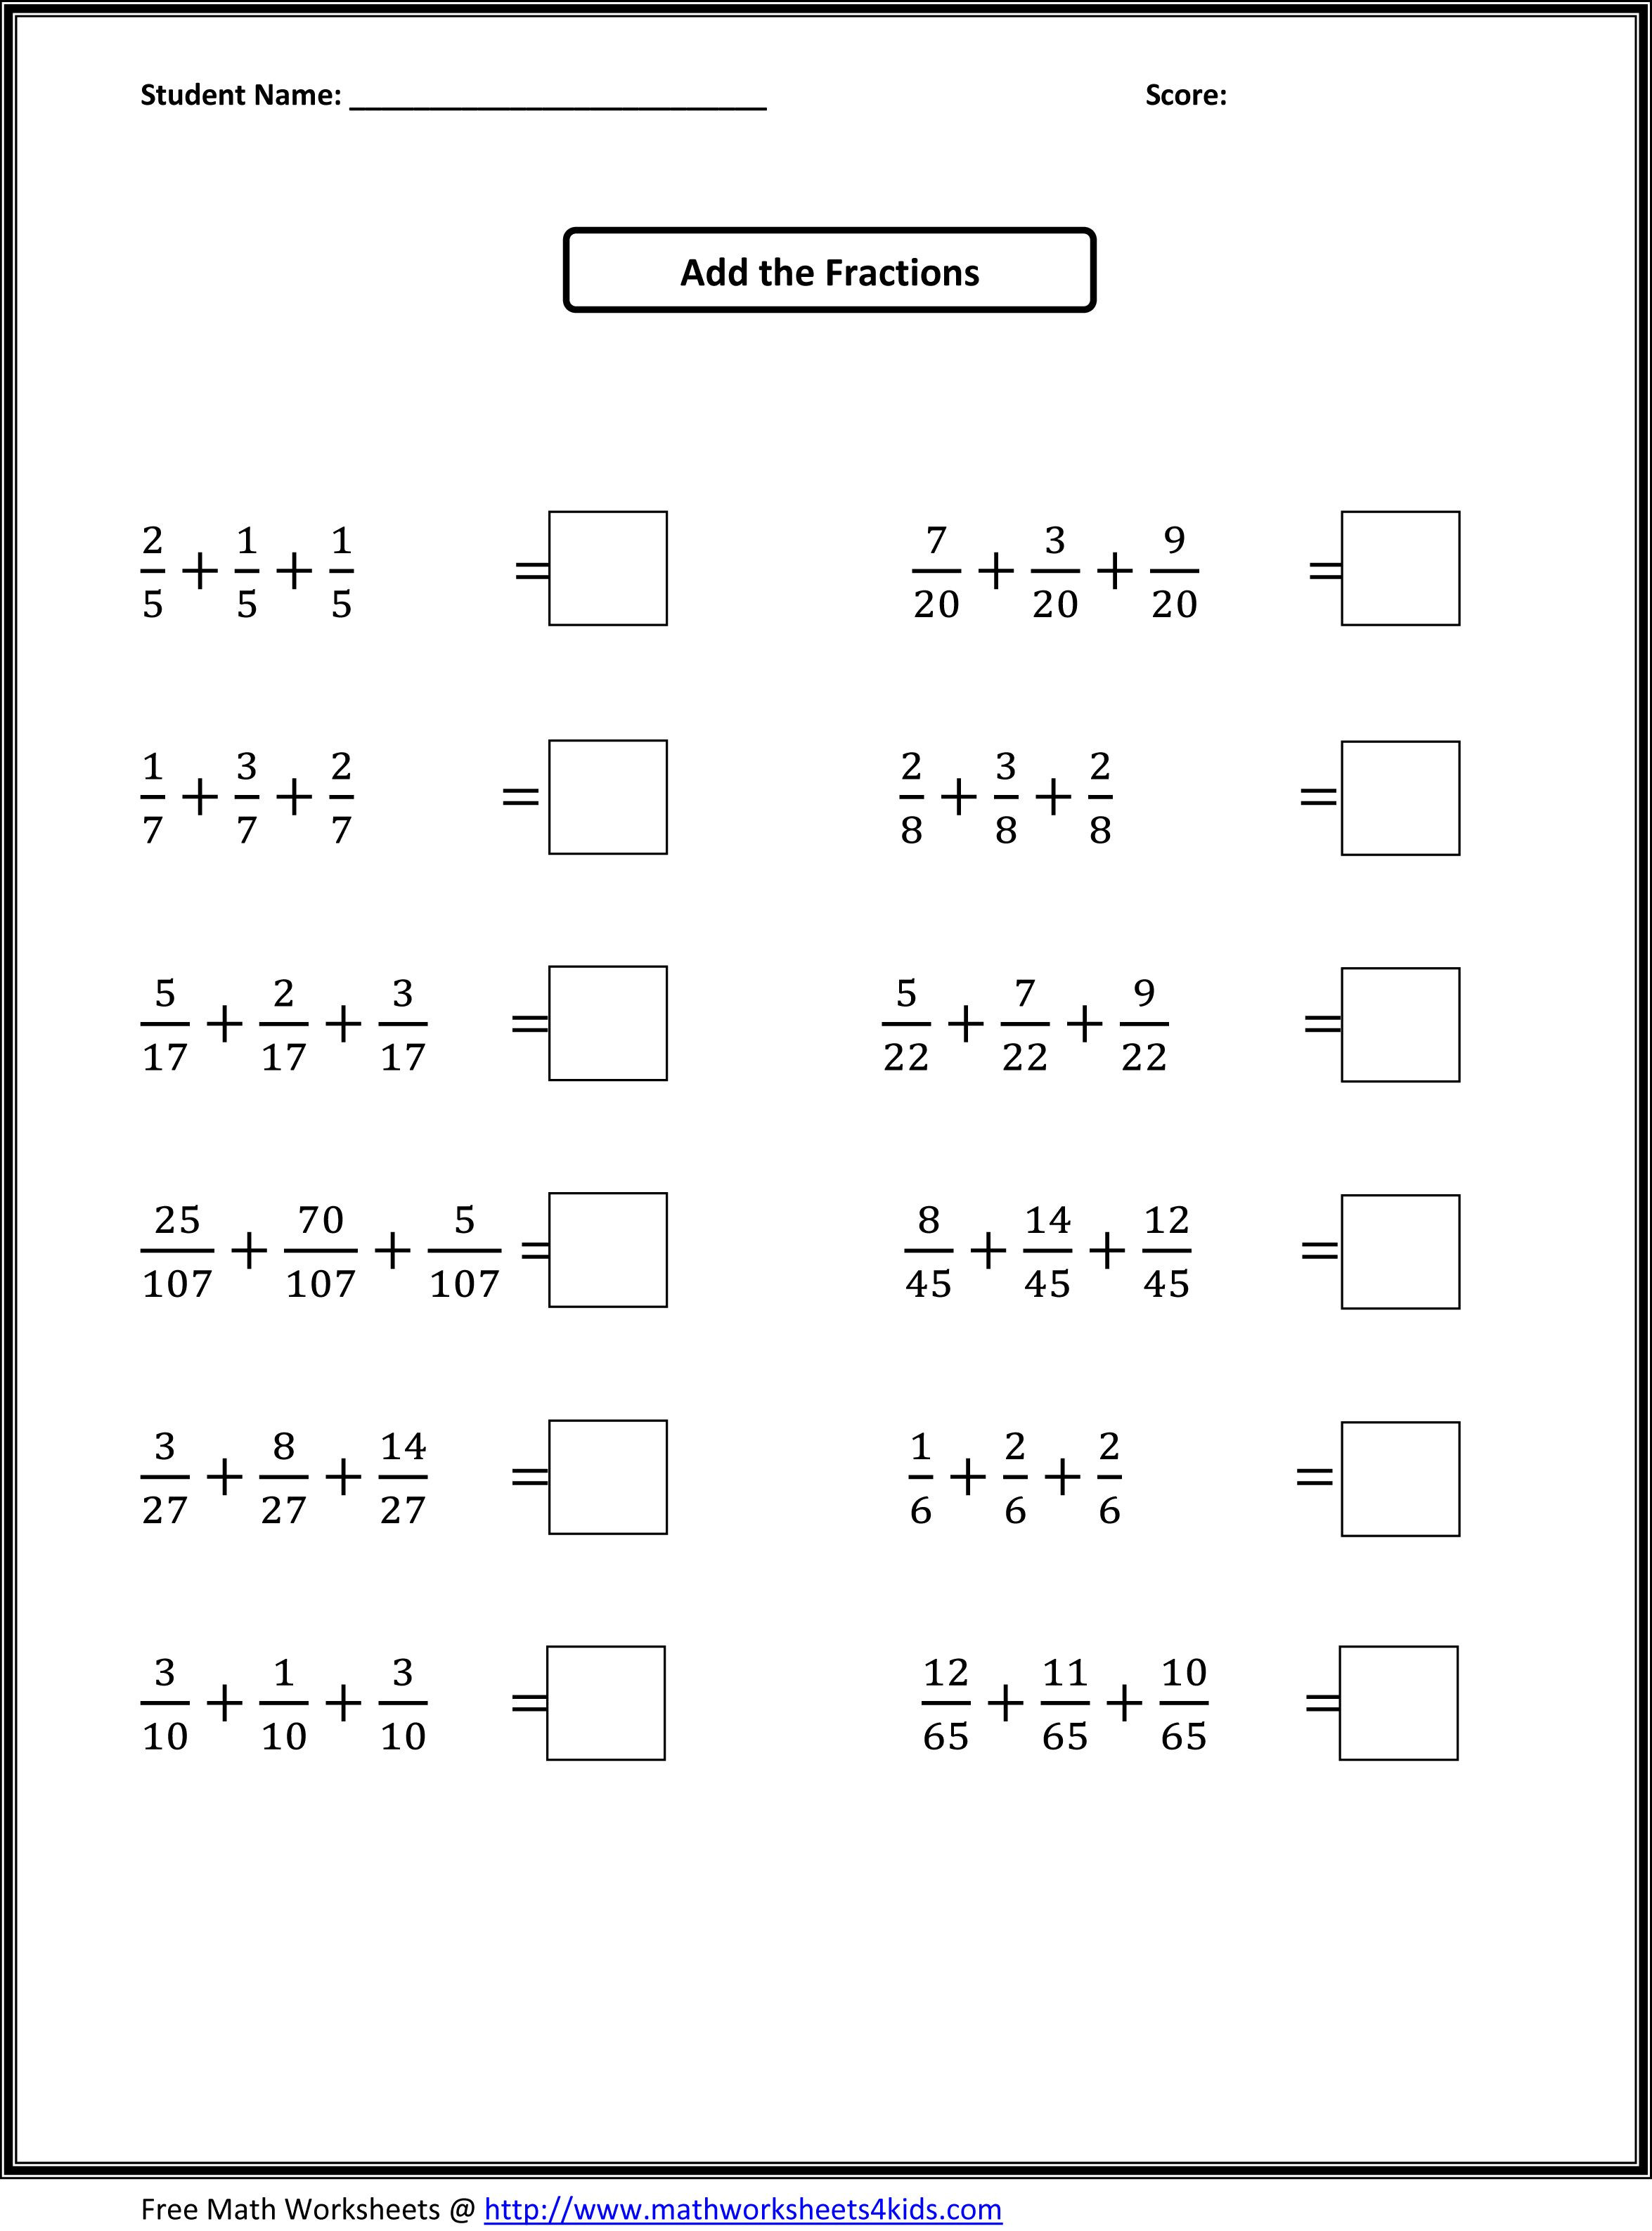 Fractions Worksheets Grade 4 Printable Worksheets by Grade Level and by Skill